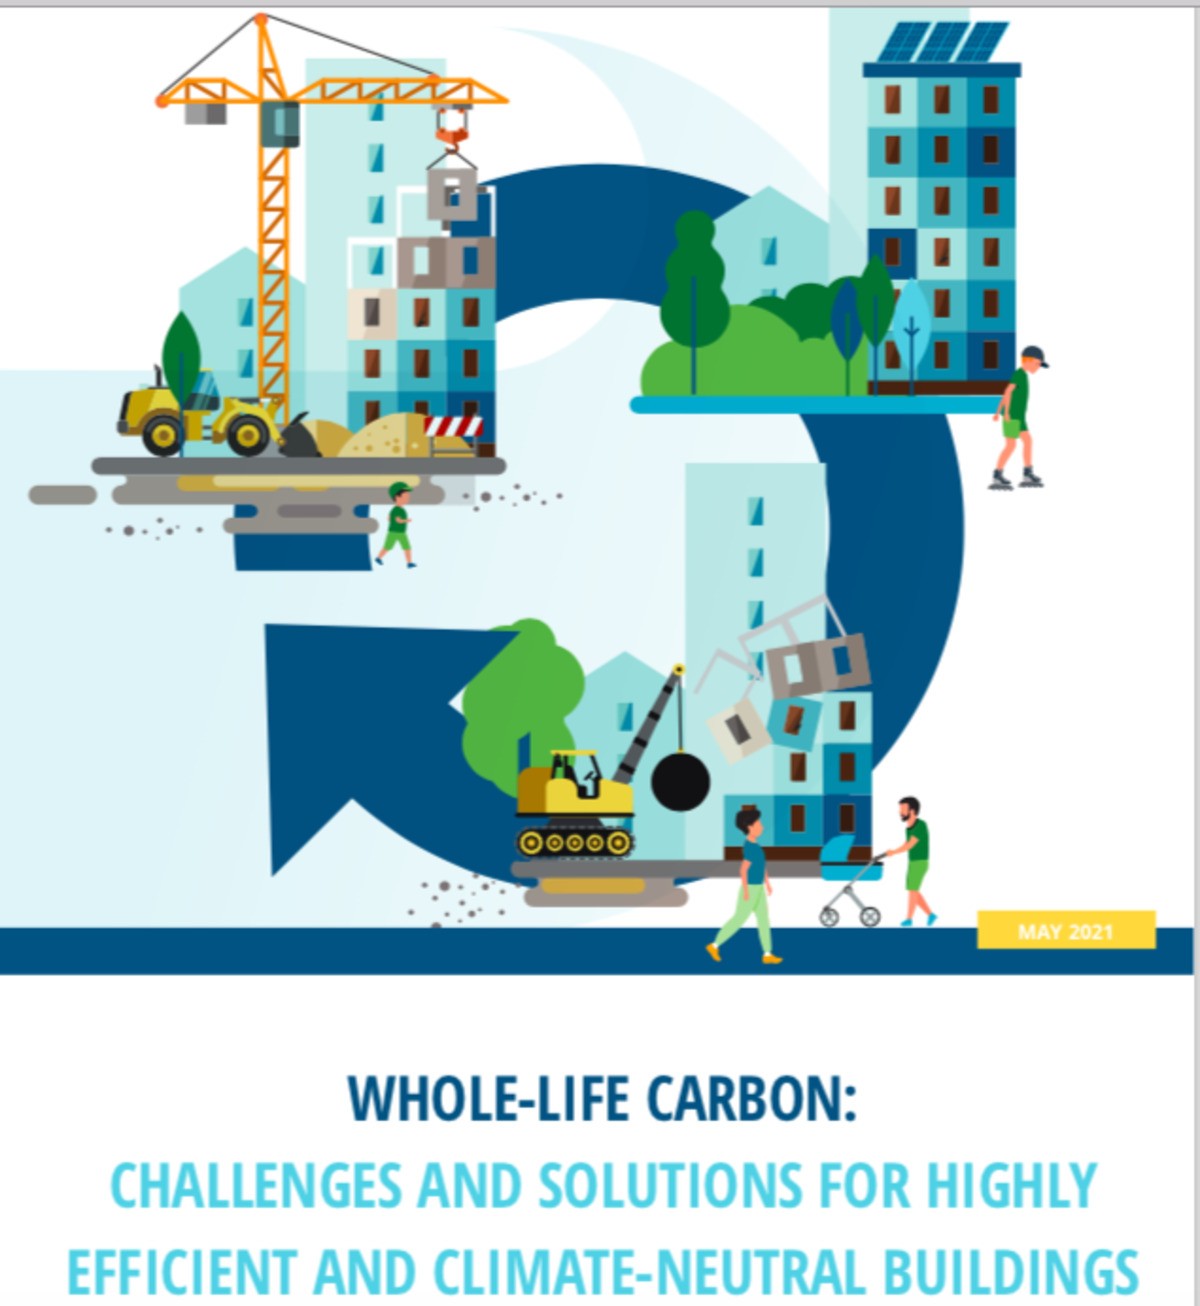 Whole-life Carbon: Challenges and solutions for highly efficient and climate-neutral buildings